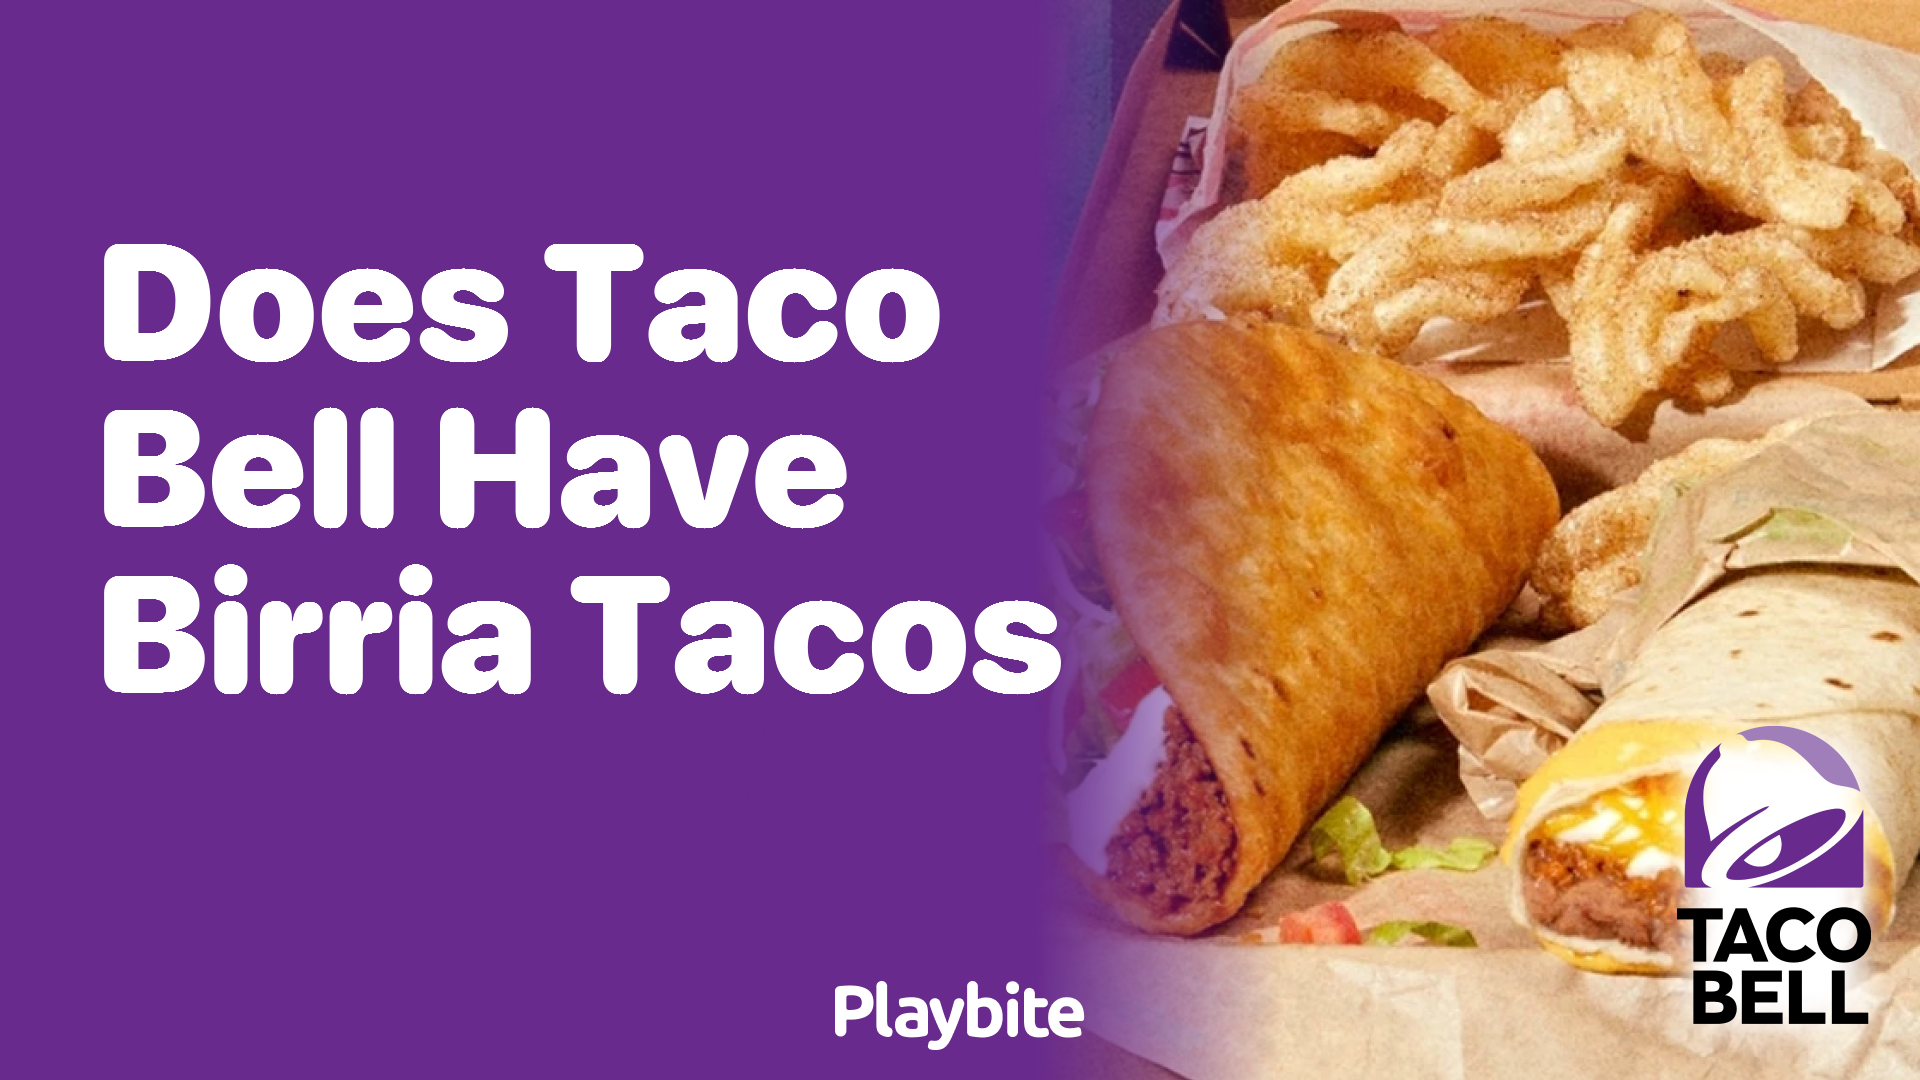 Does Taco Bell Have Birria Tacos? Find Out Here!